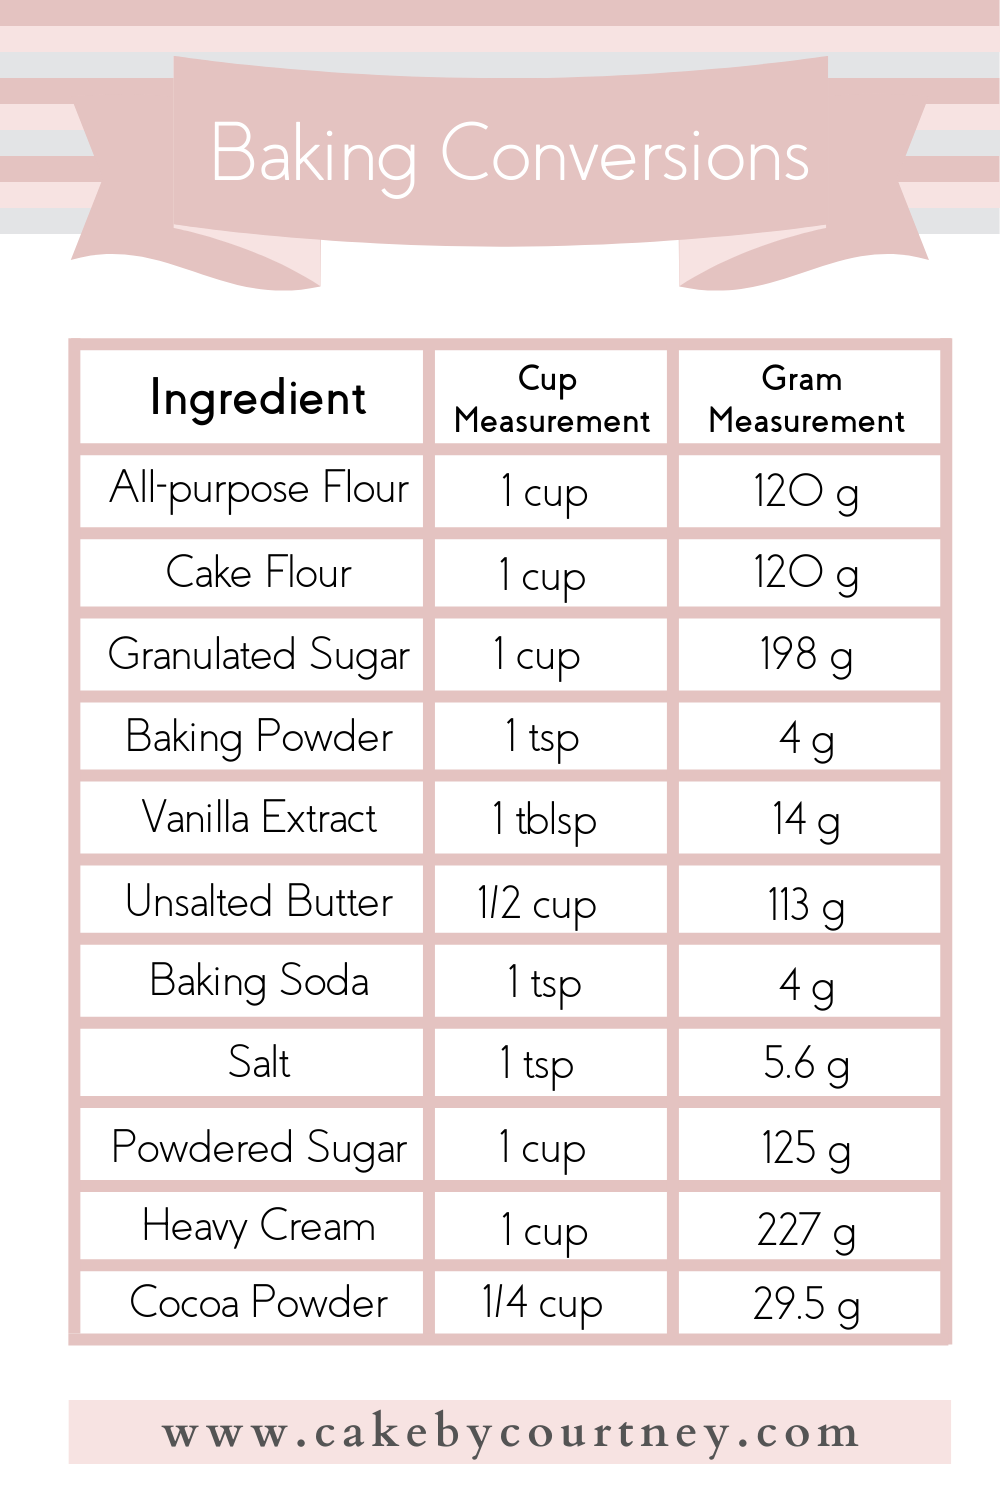 baking conversion chart for basic ingredients. www.cakebycourtney.com